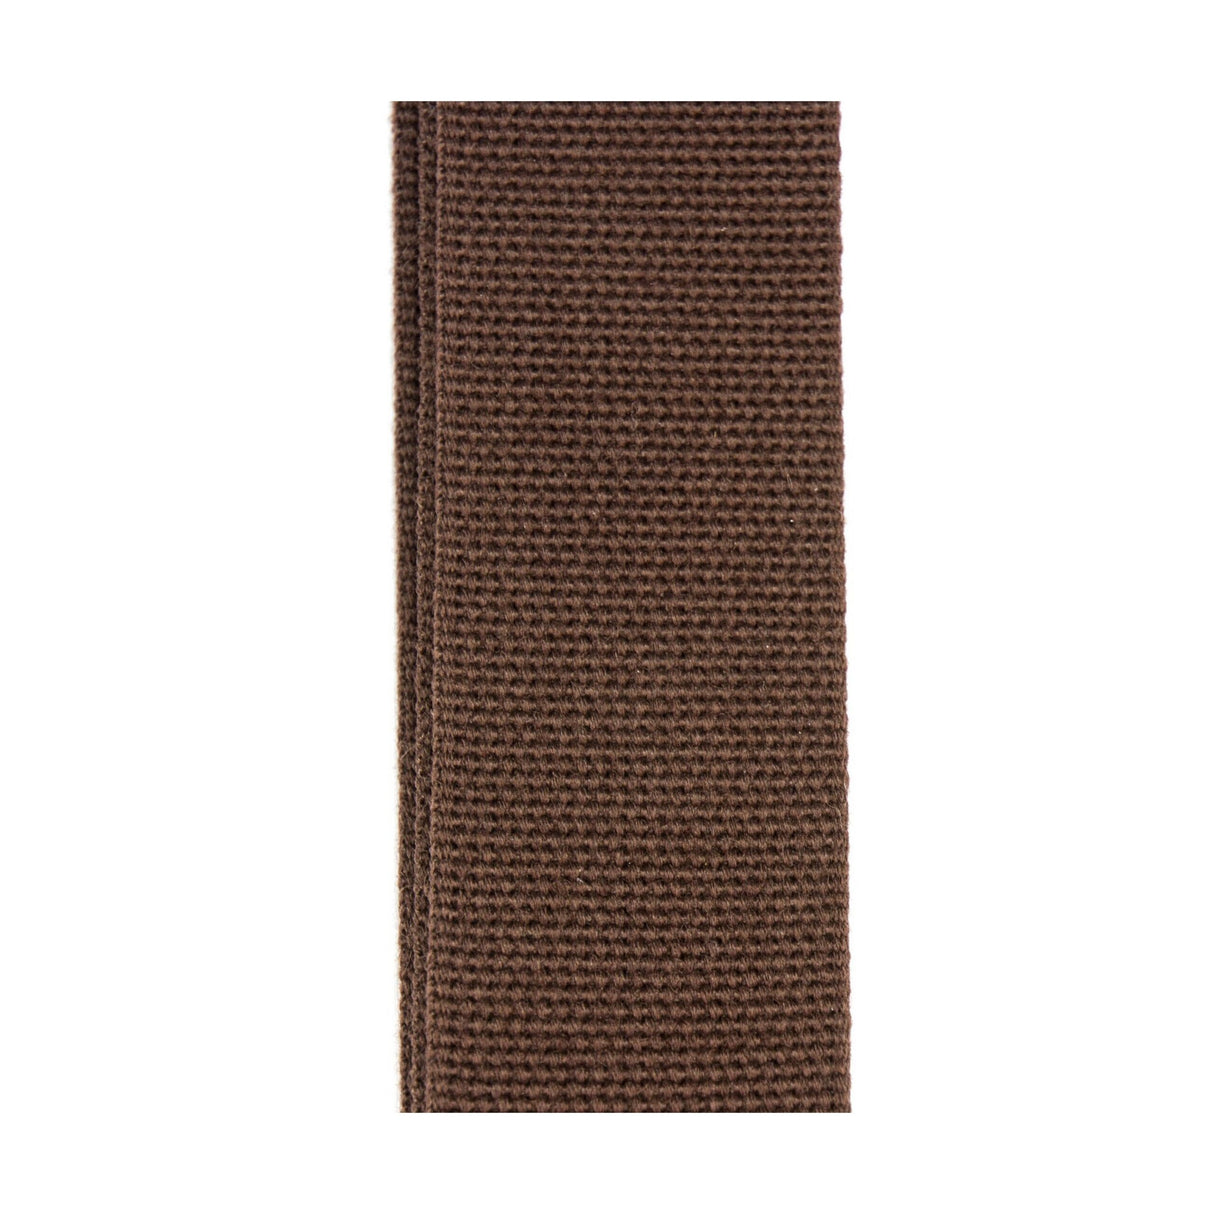 Reunion Blues RBS-34 Merino Wool Guitar Strap, Brown with Chestnut Brown Leather Tab